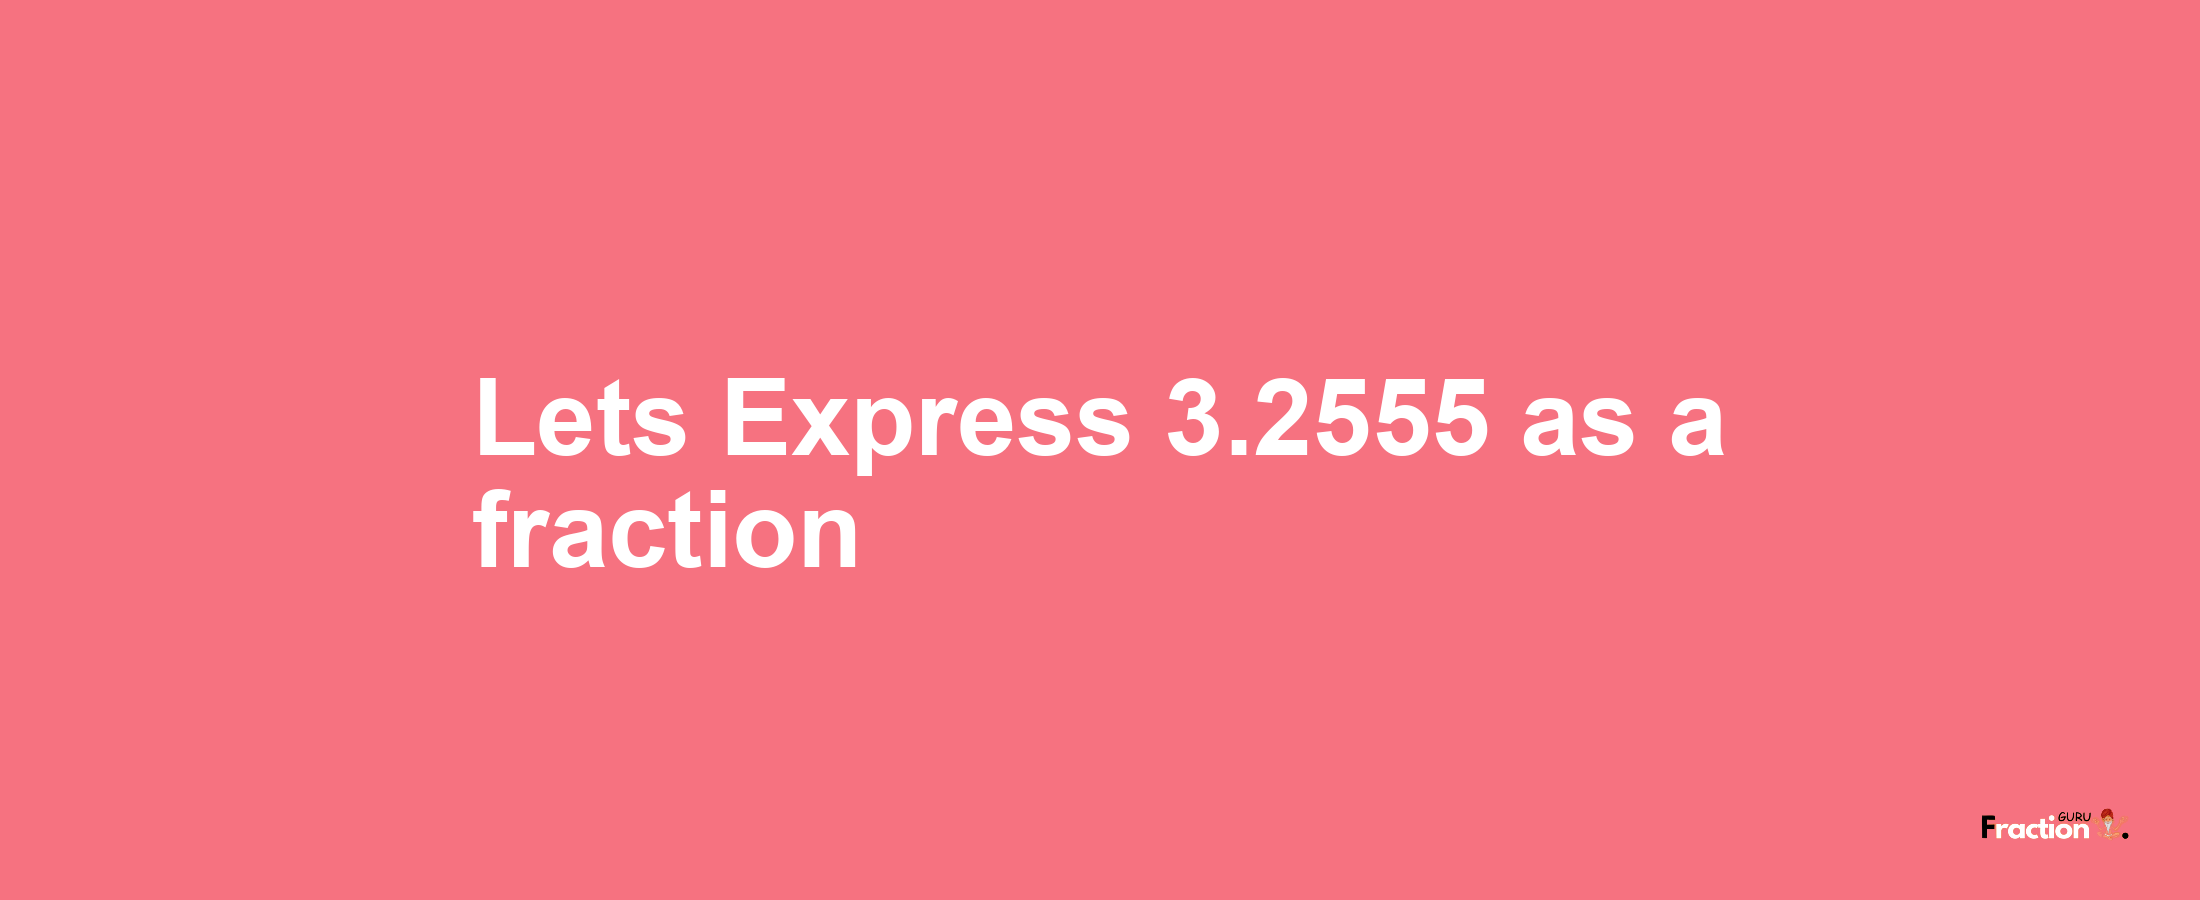 Lets Express 3.2555 as afraction